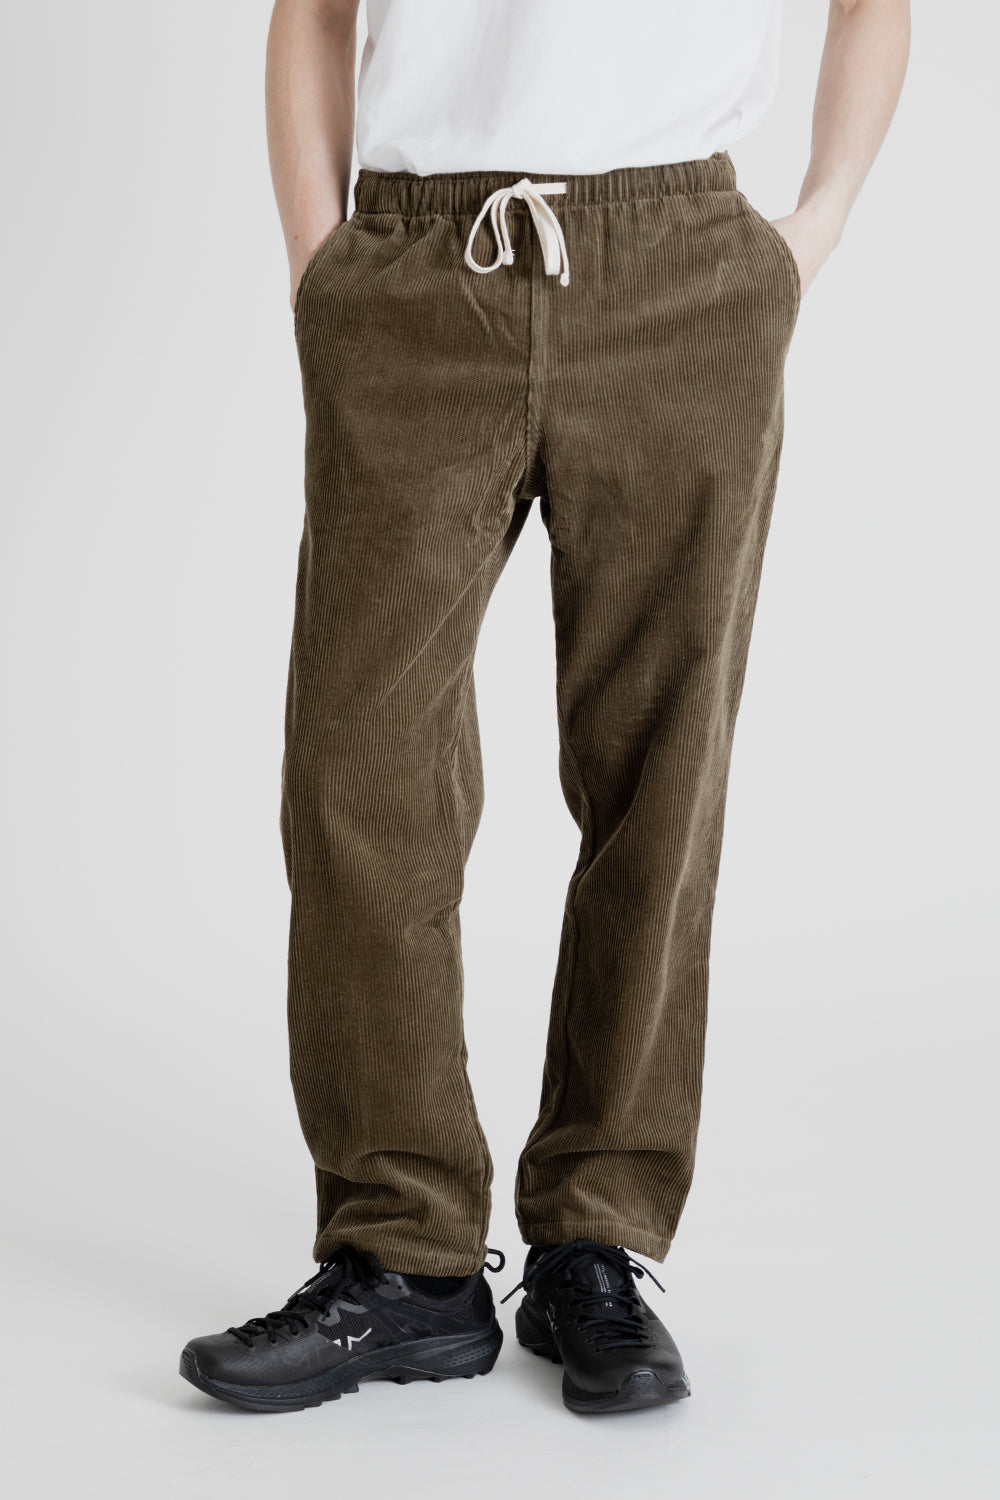 Battenwear Active Corduroy Lazy Pants in Olive